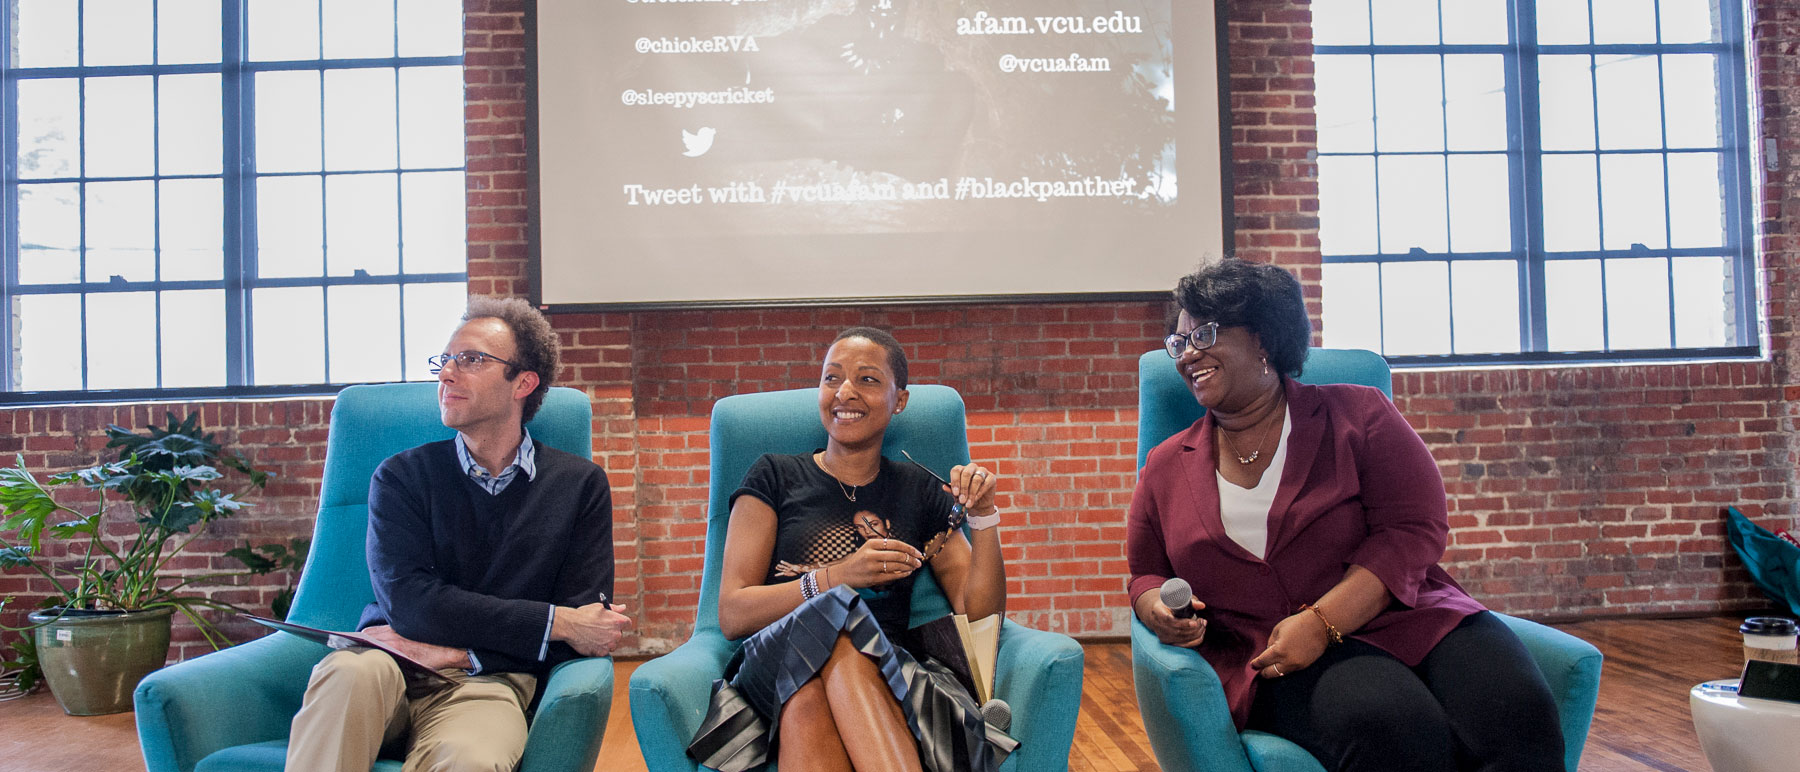 v.c.u. professors participating in a panel discussion about the move 'black panther'